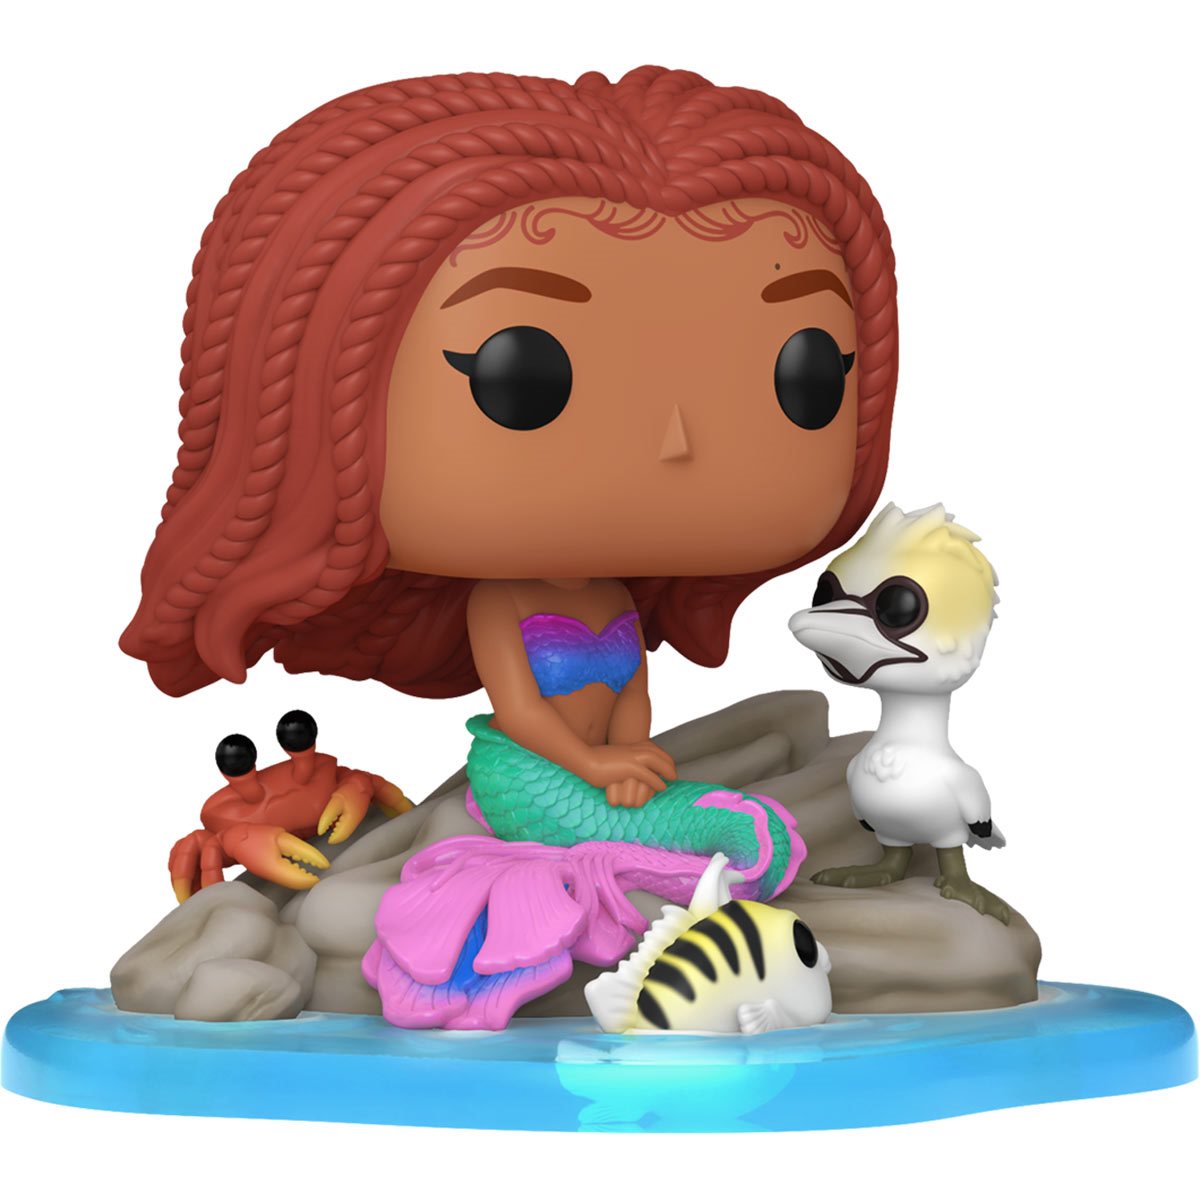 The Little Mermaid Live Action Ariel and Friends Deluxe Funko Pop